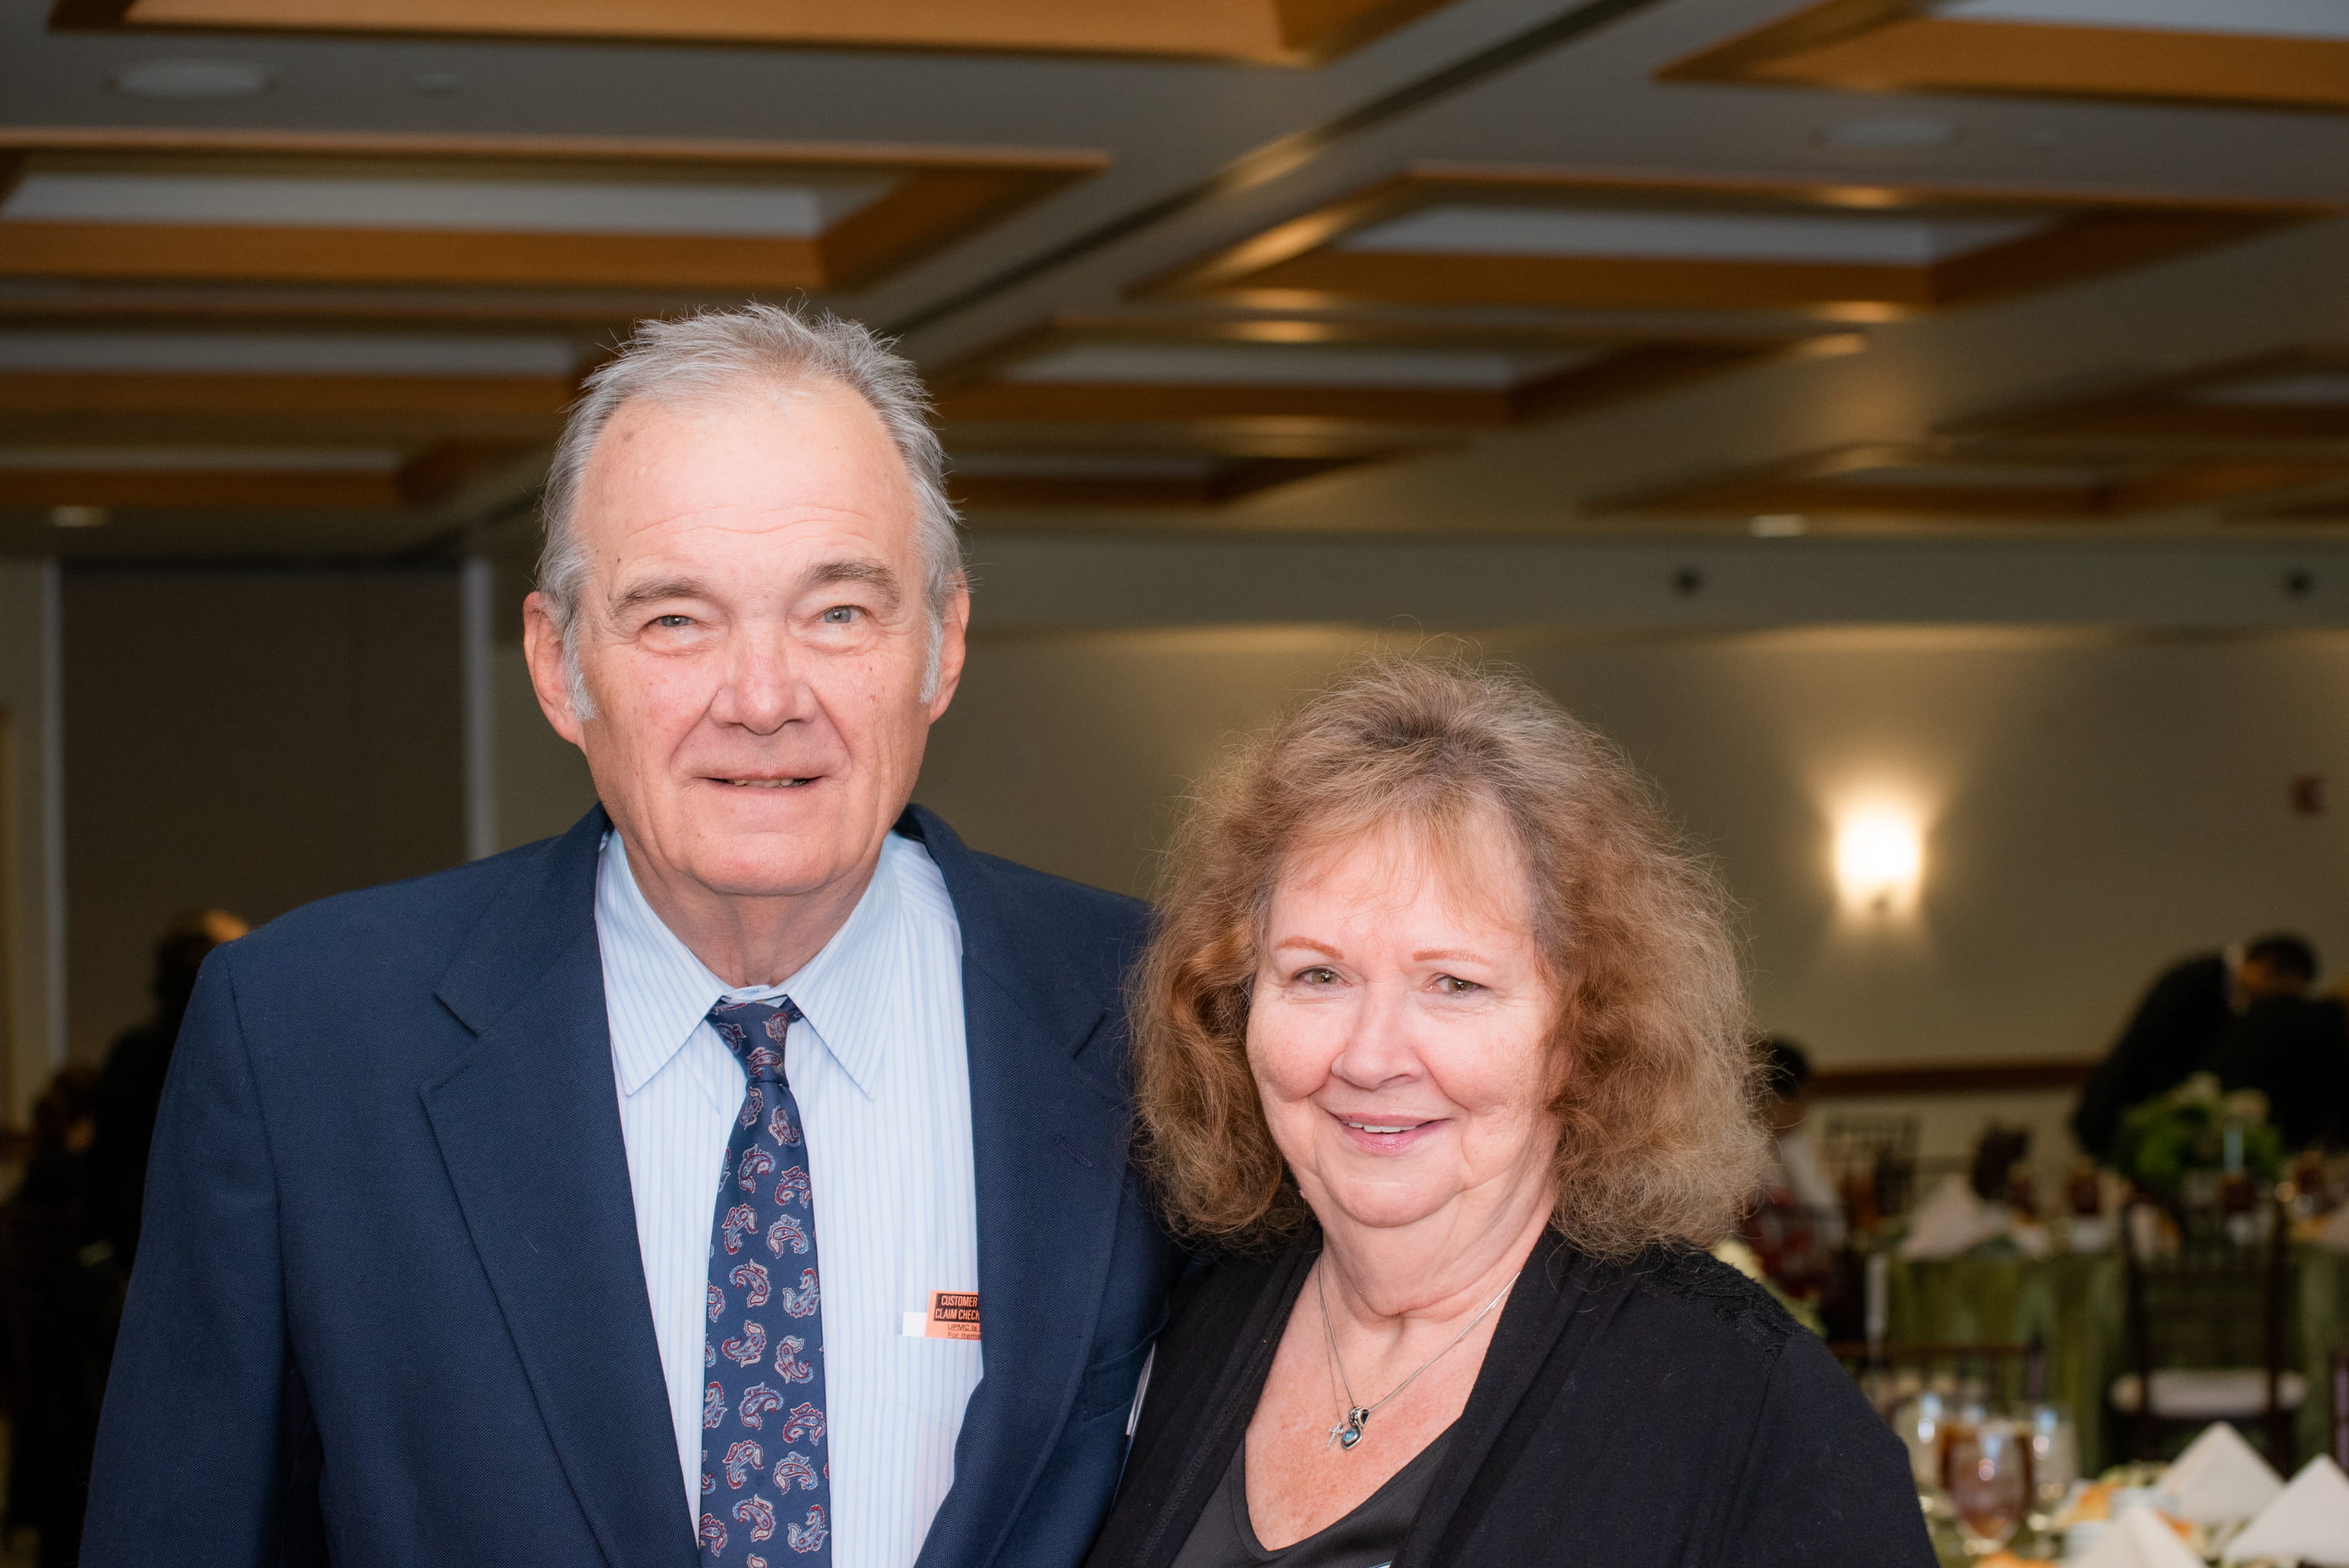 2019 HDLC Donor Recognition Luncheon